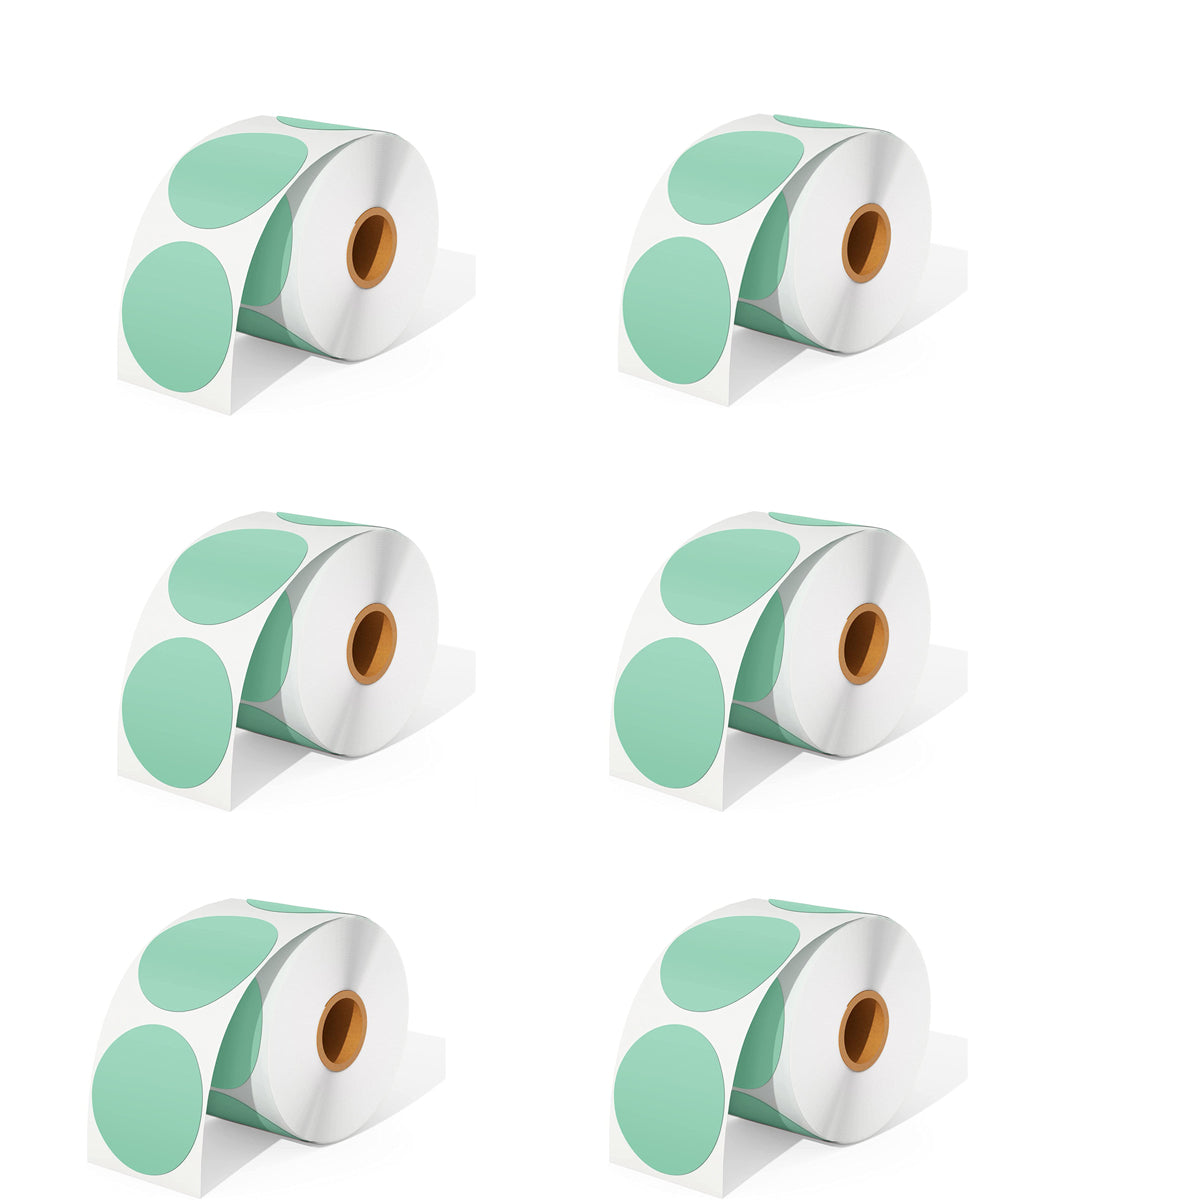 MUNBYN offers six rolls of green direct thermal round labels as a kit, with 750 labels per roll.